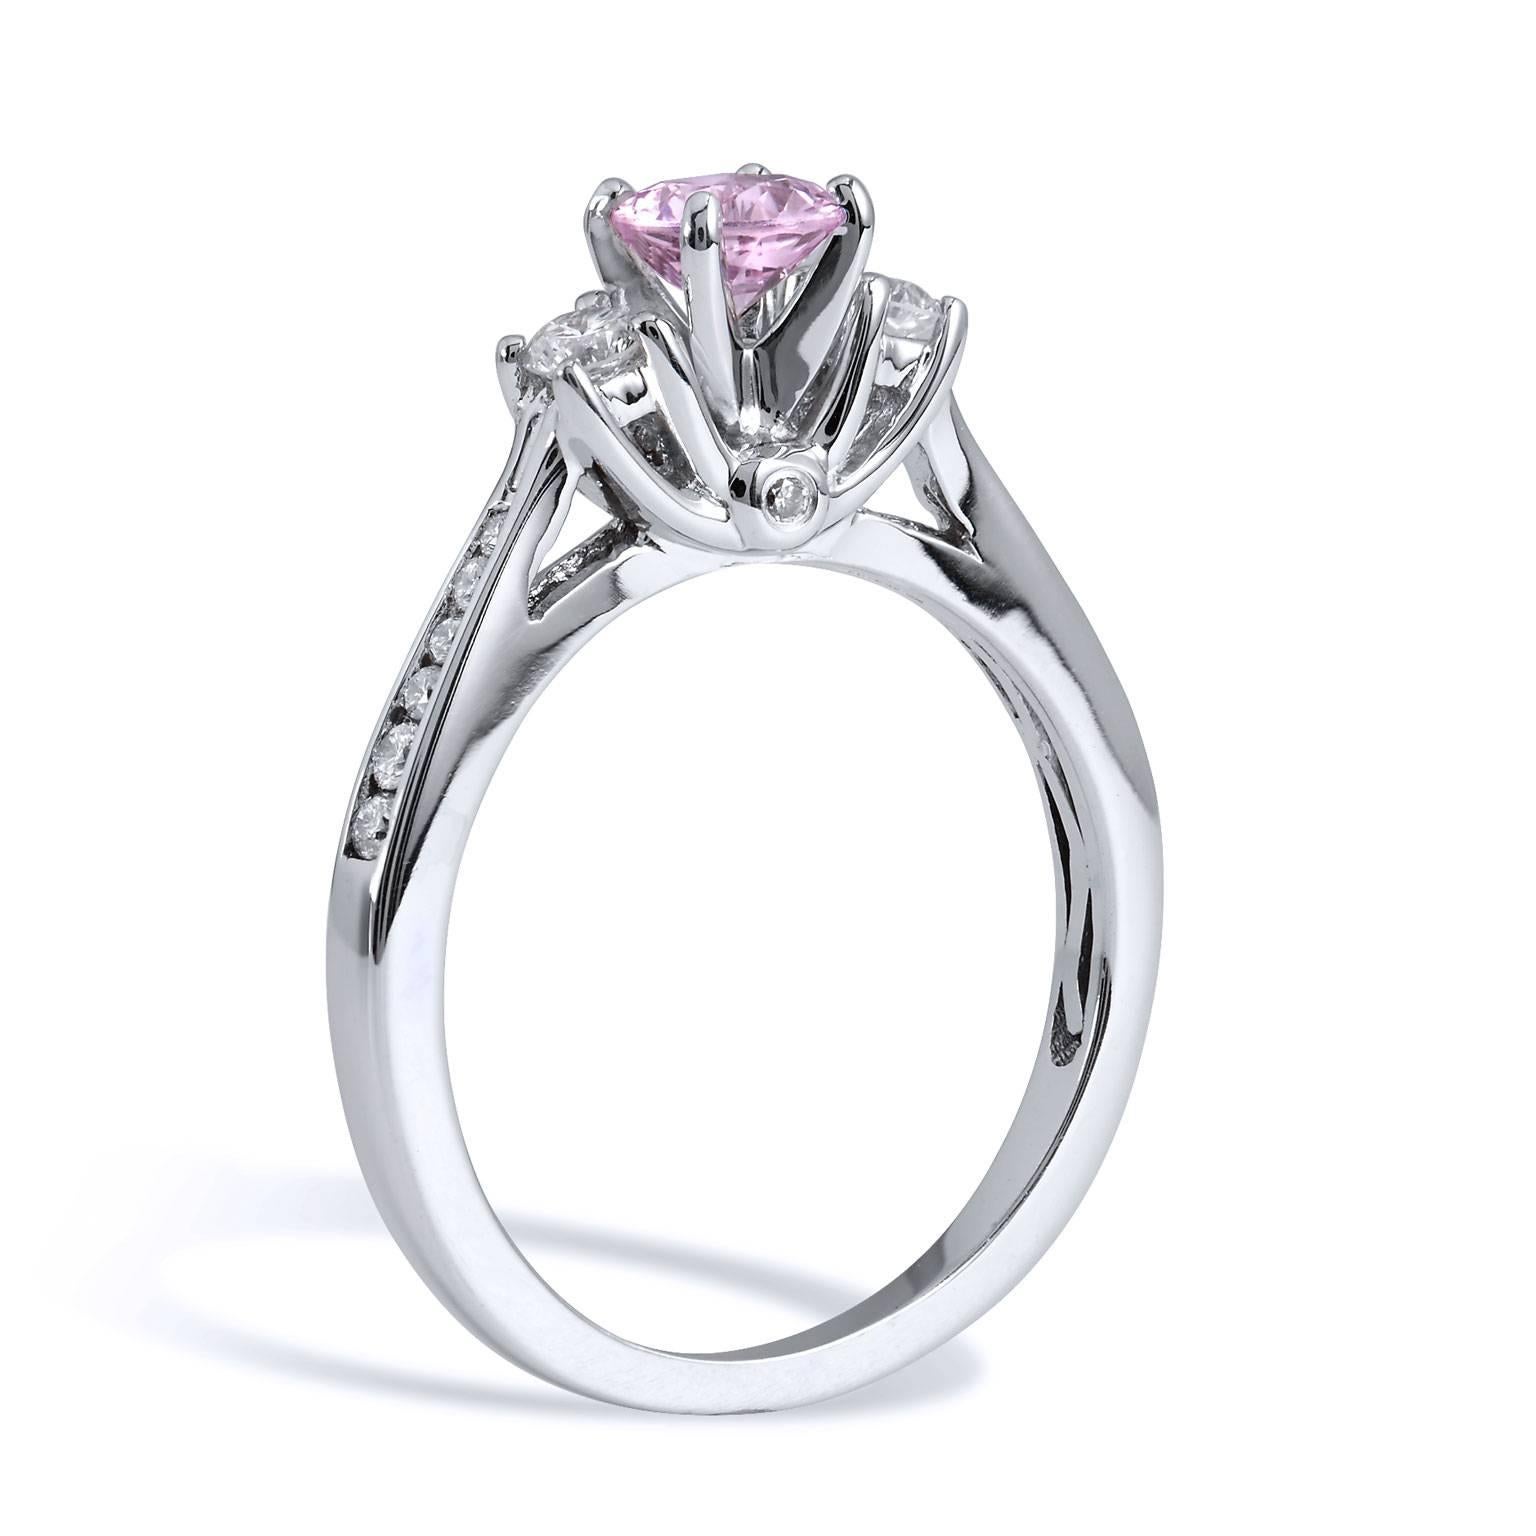 Enjoy this previously loved 0.55 carat round, no-heat pink sapphire set at center. Accompanied by two accent round diamonds, with a total weight of 0.15 carat affixed at each side, 0.08 carat of pave-set diamond sweep the shank with grace. For added